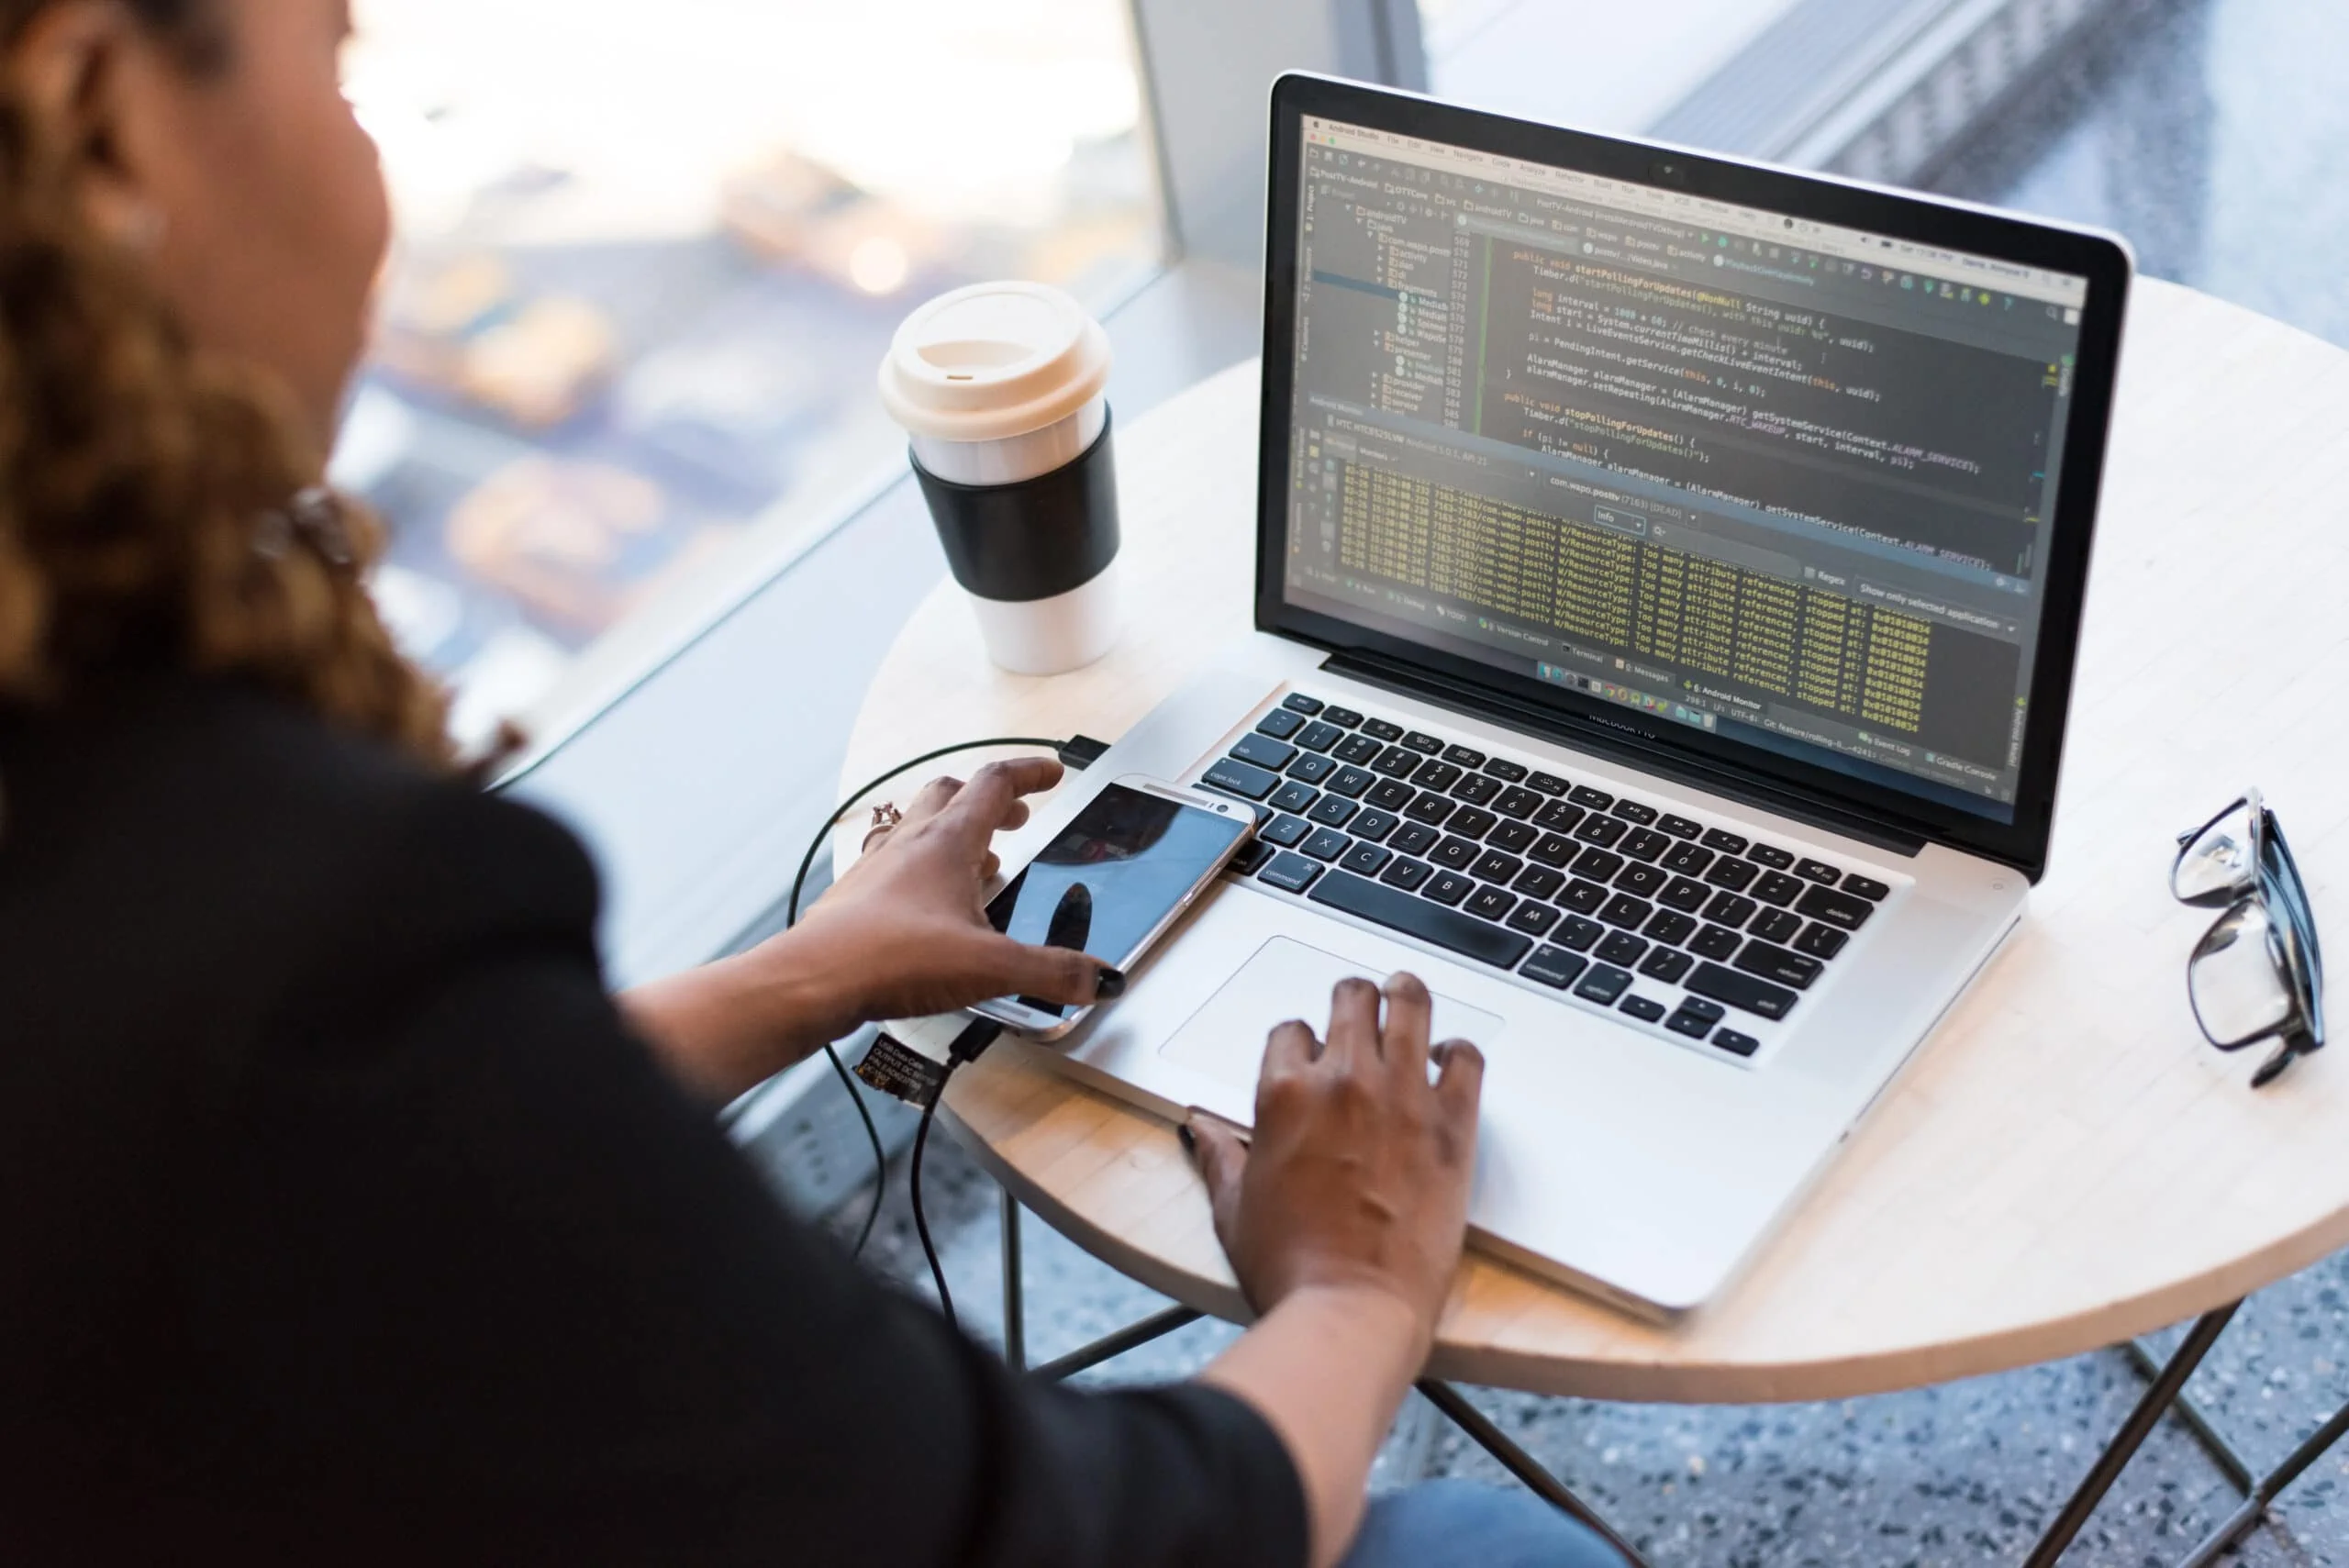 5 Reasons to Consider a Career as a Web Developer